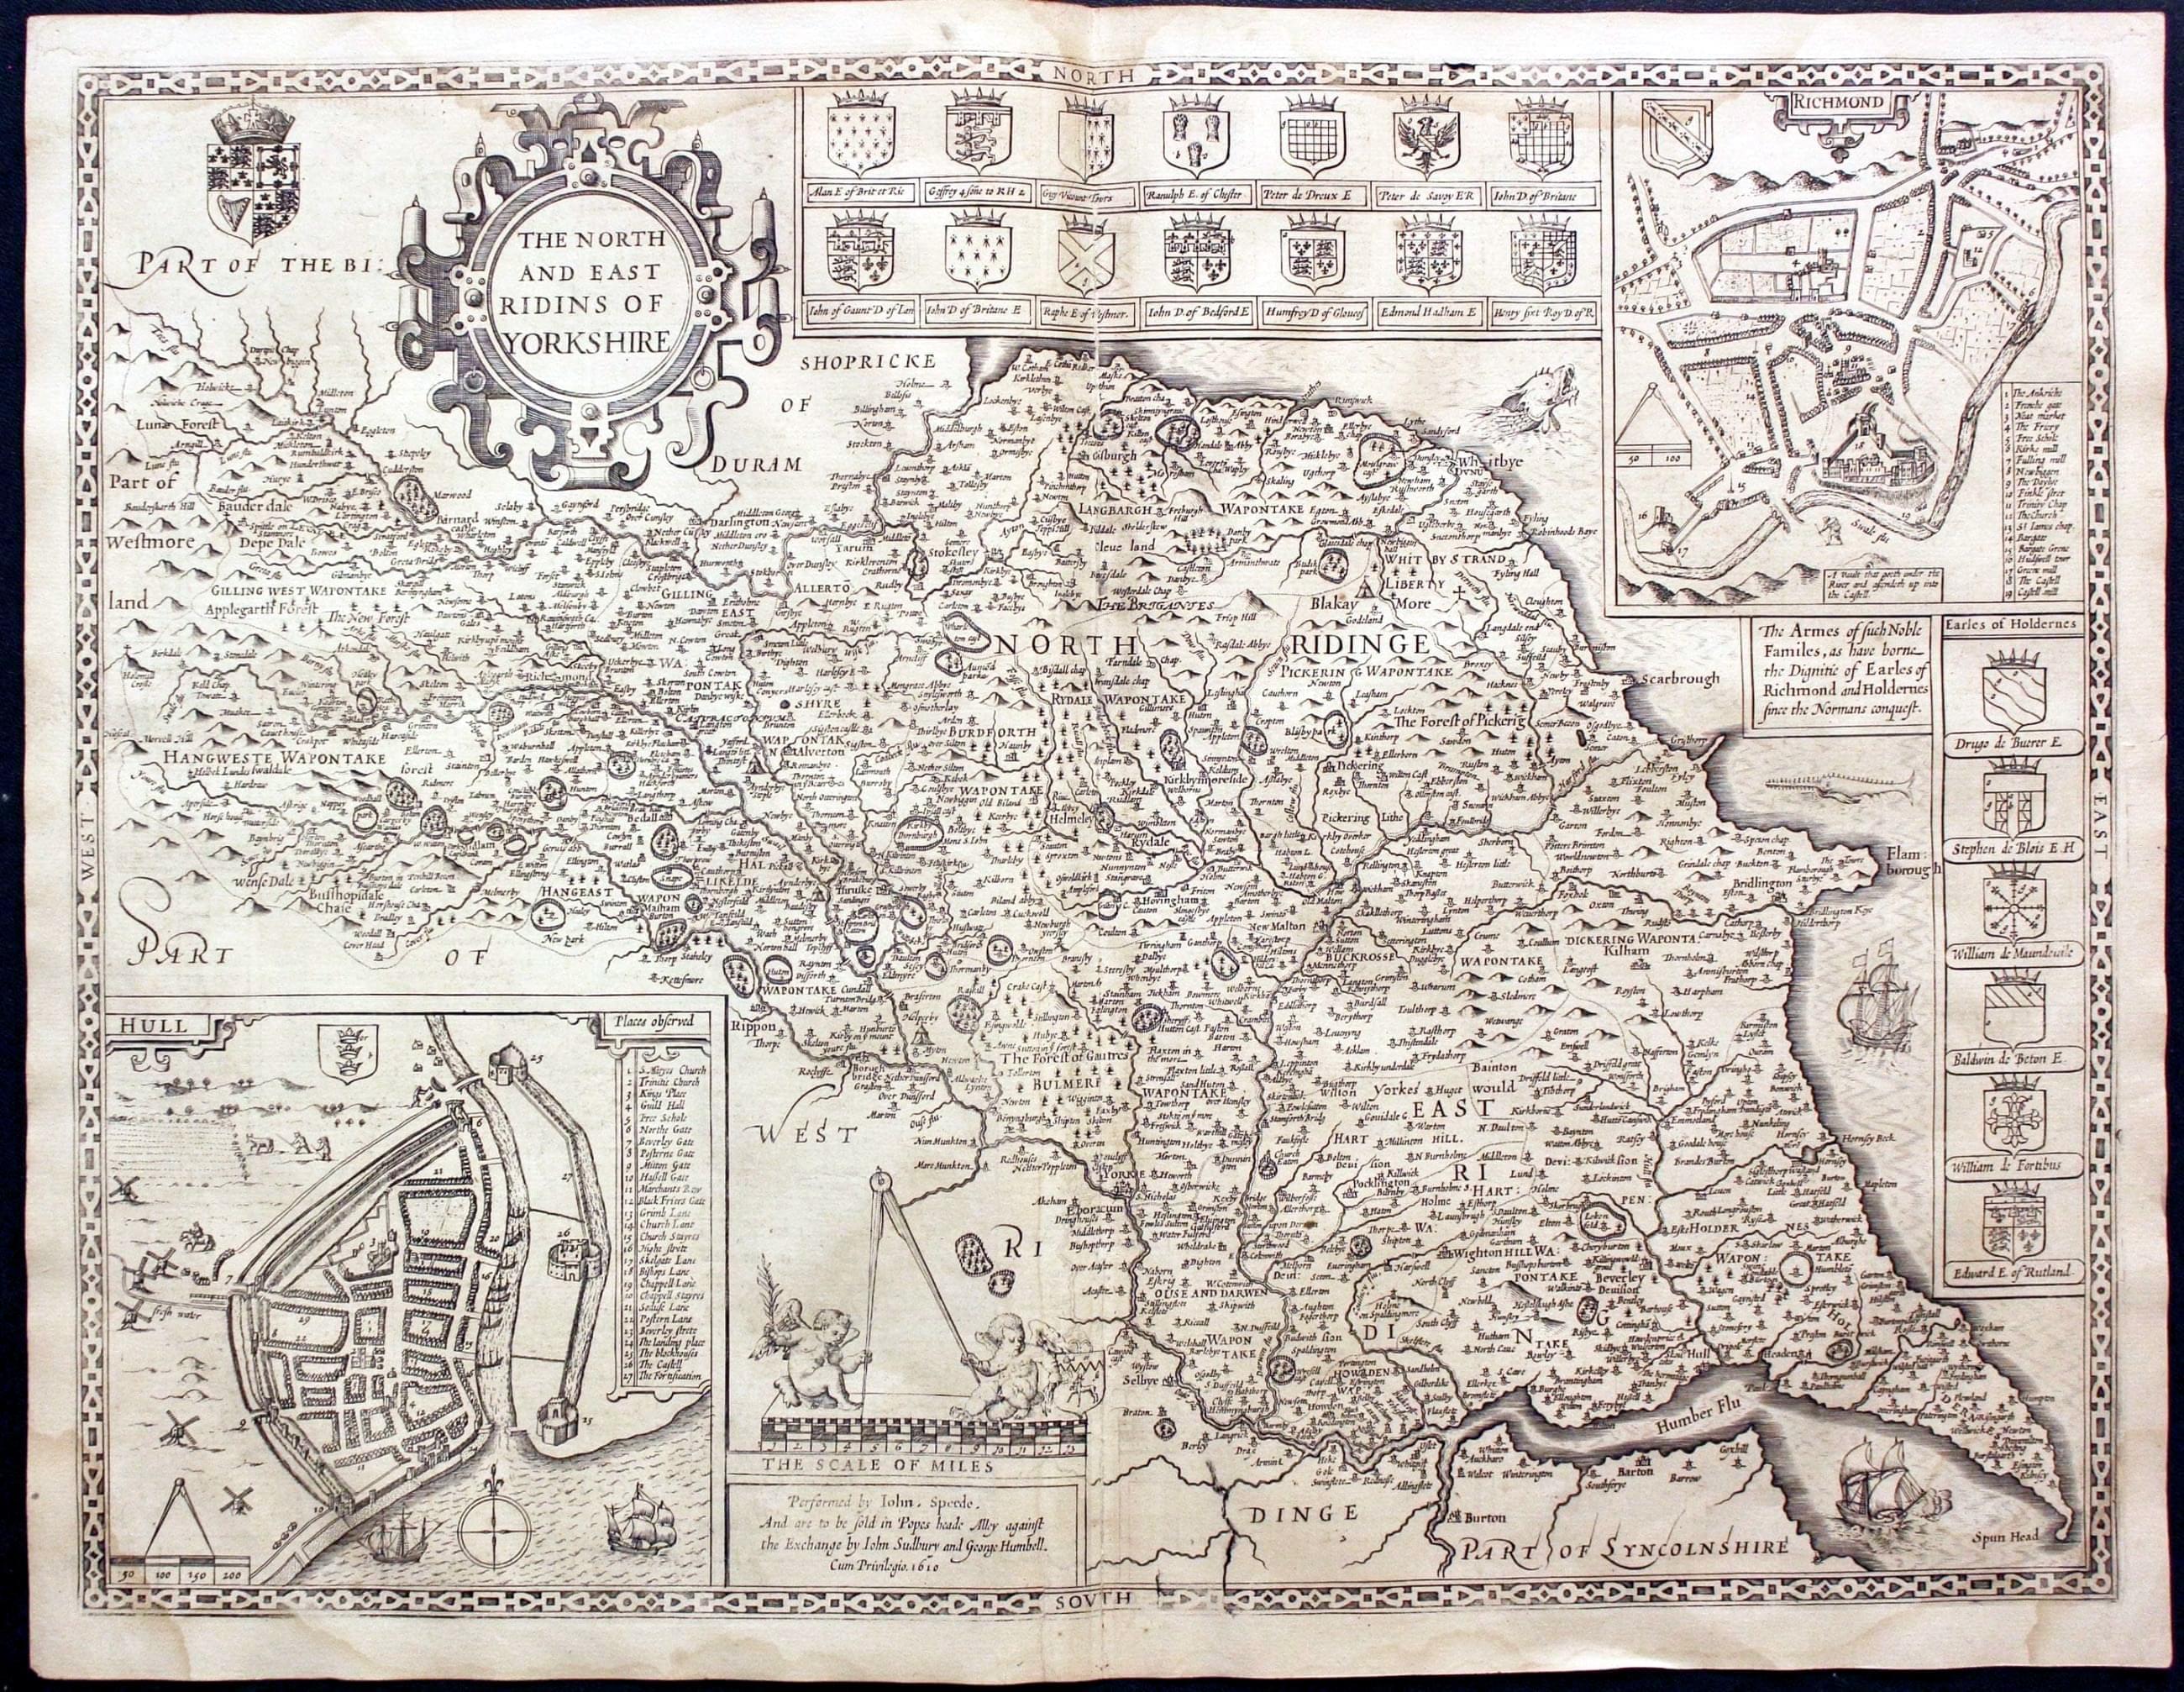  Map of Bedfordshire by John Speed, 1646 